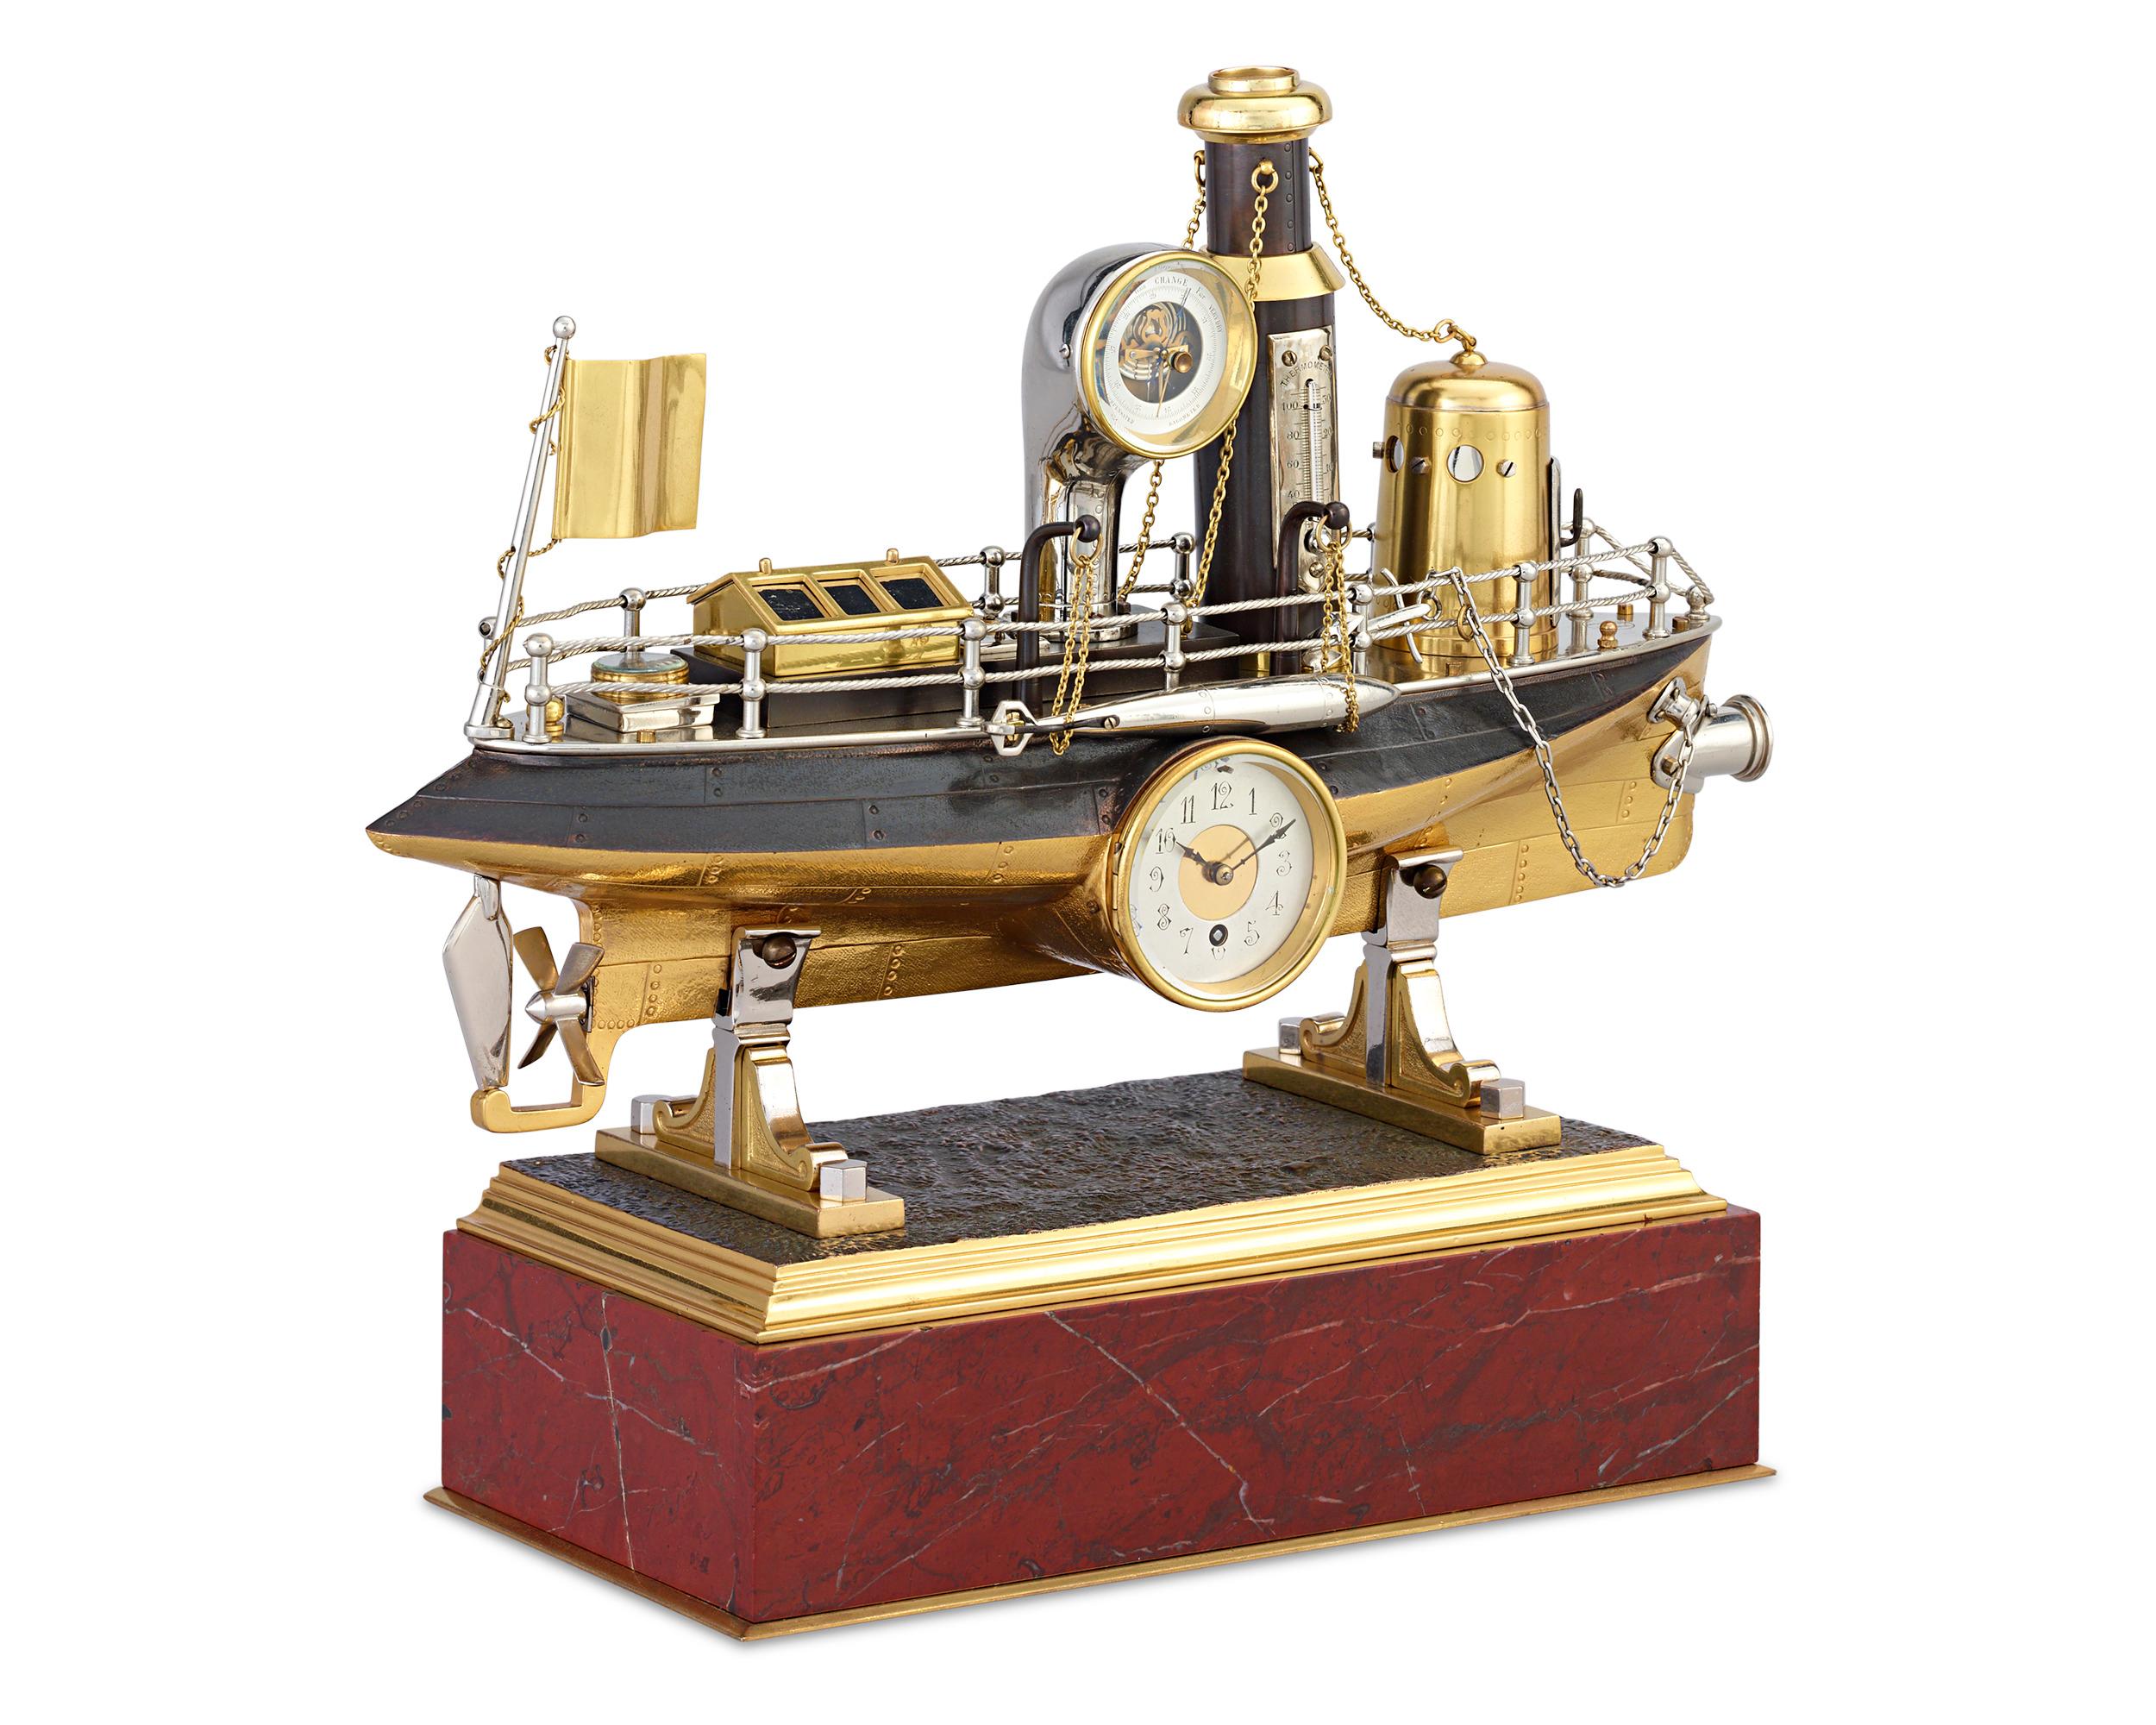 Taking the form of a battleship, this French automaton clock is a spellbinding example of the complex artistry of industrial timepieces. This genre of clockmaking rose in popularity during the Industrial Revolution, and such clocks were sought after